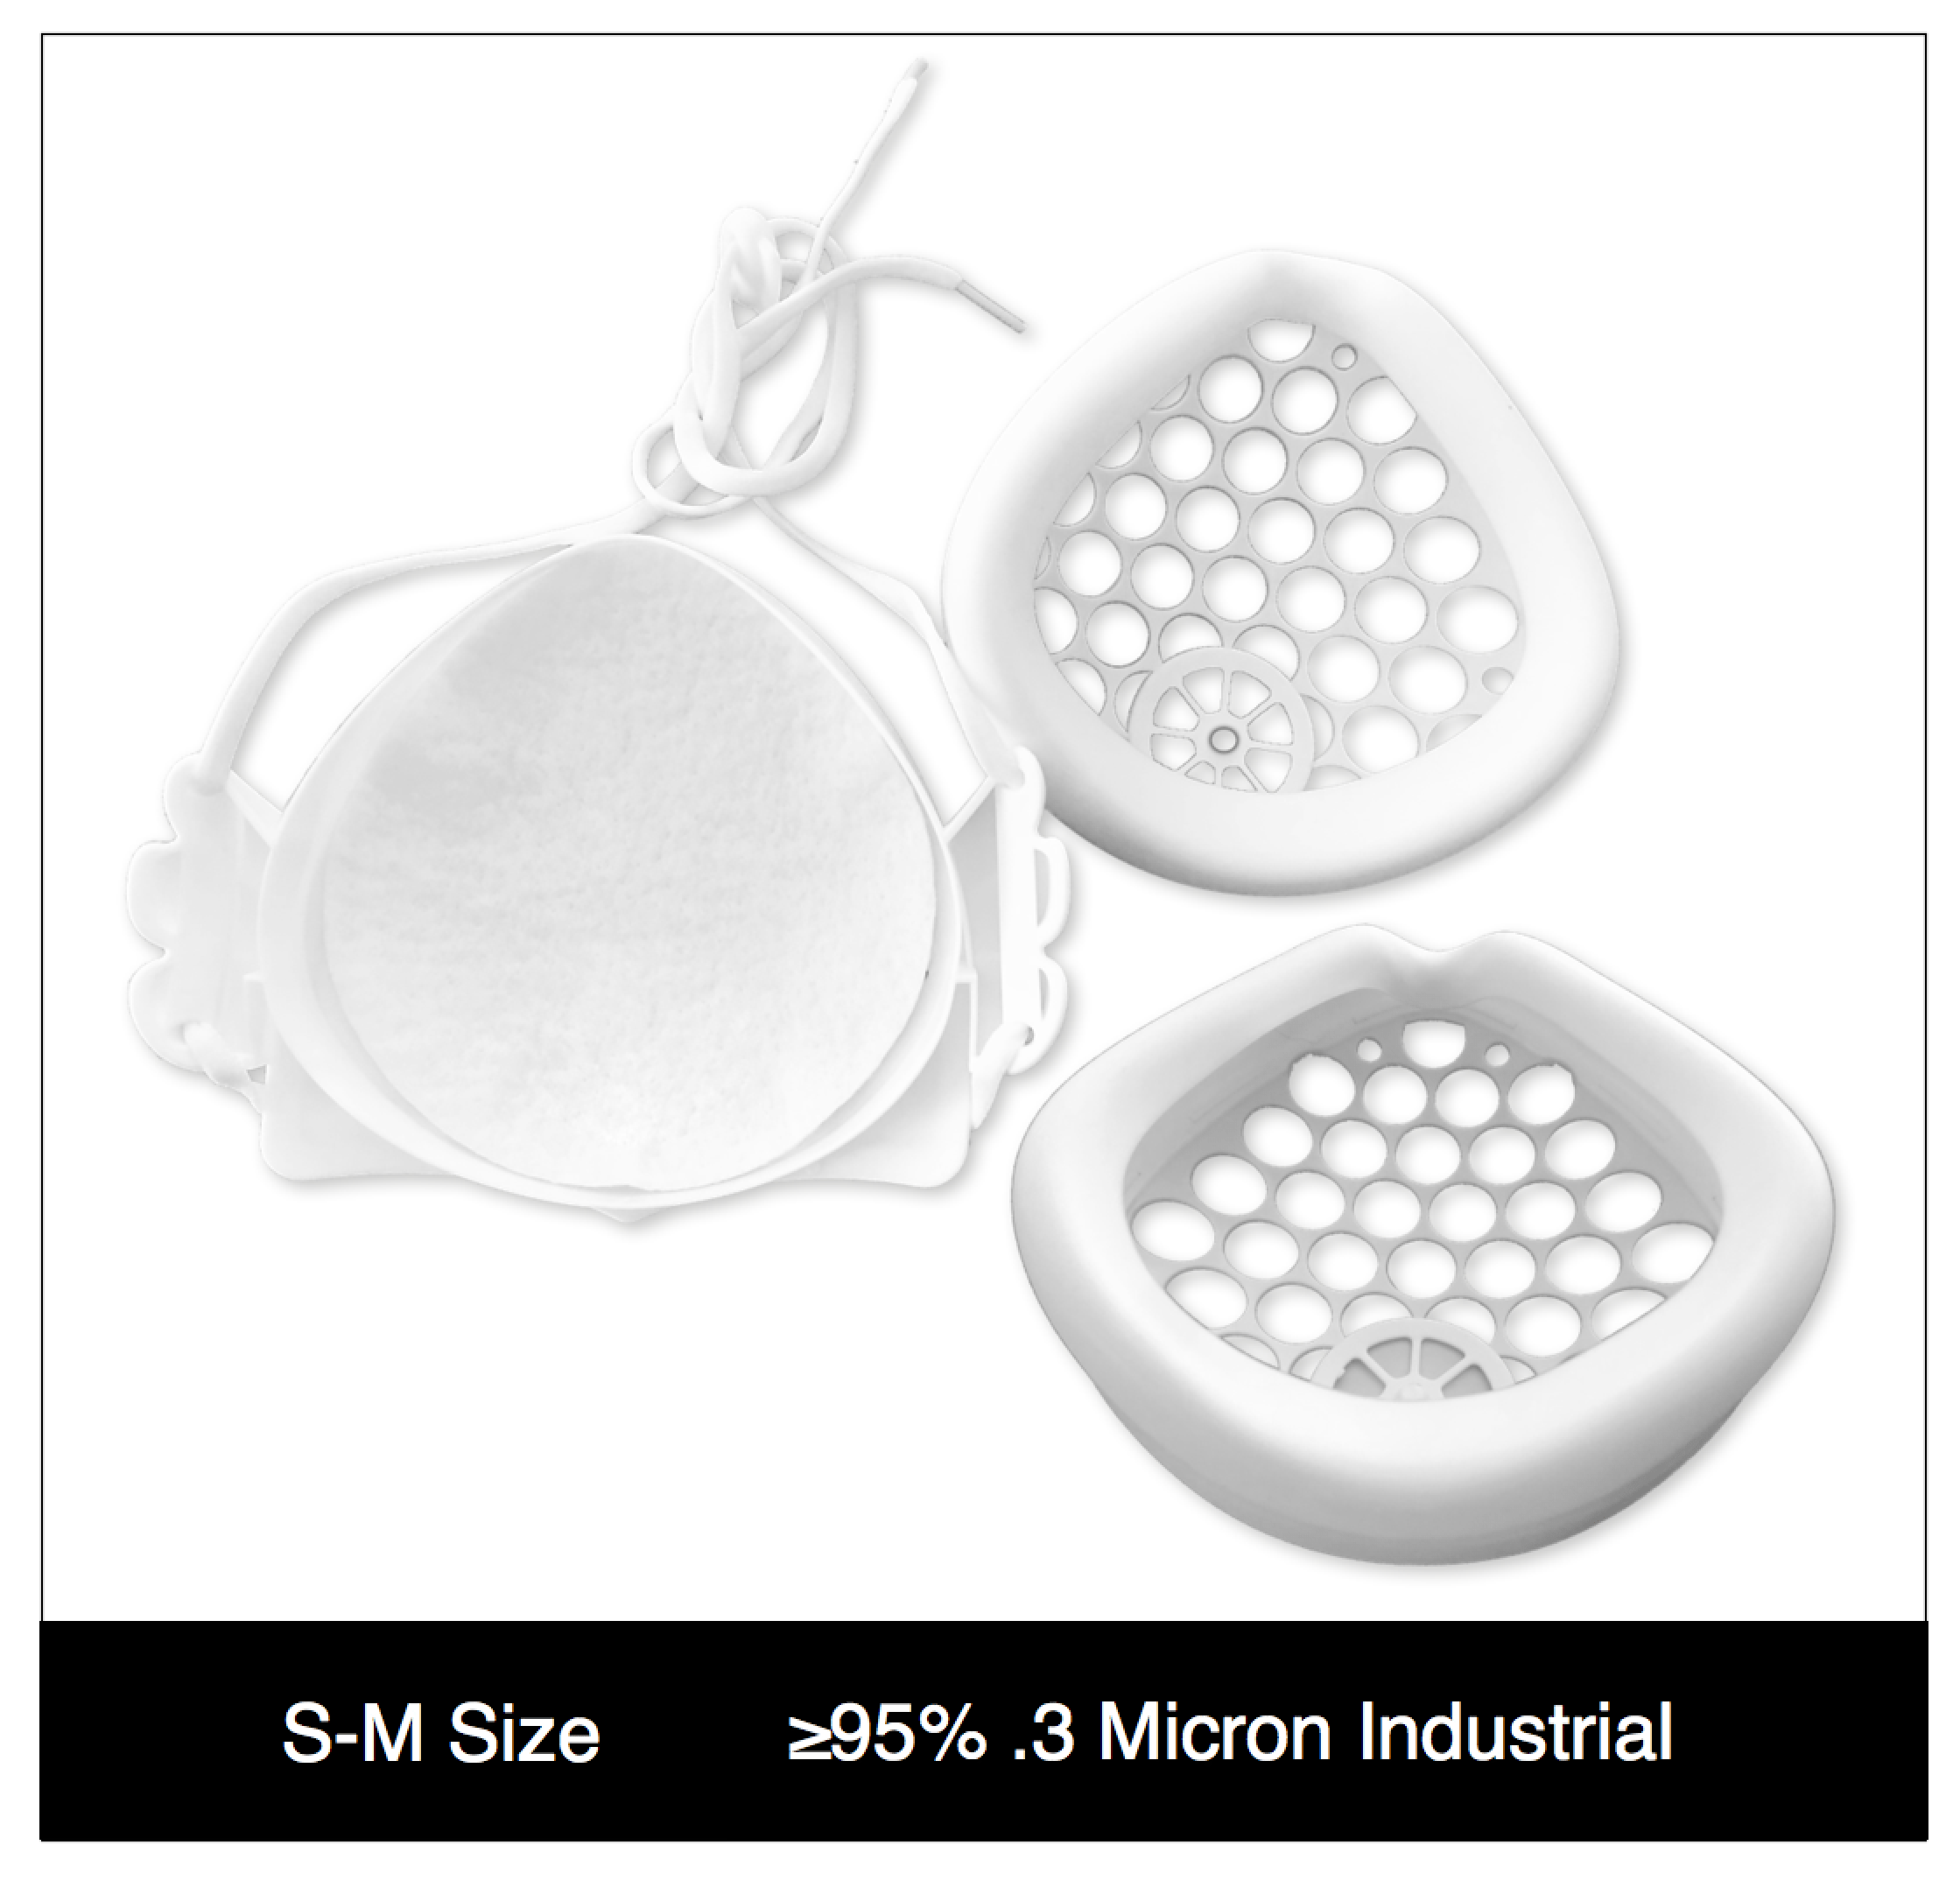 Industrial 95% Filter Set (S-M Size)